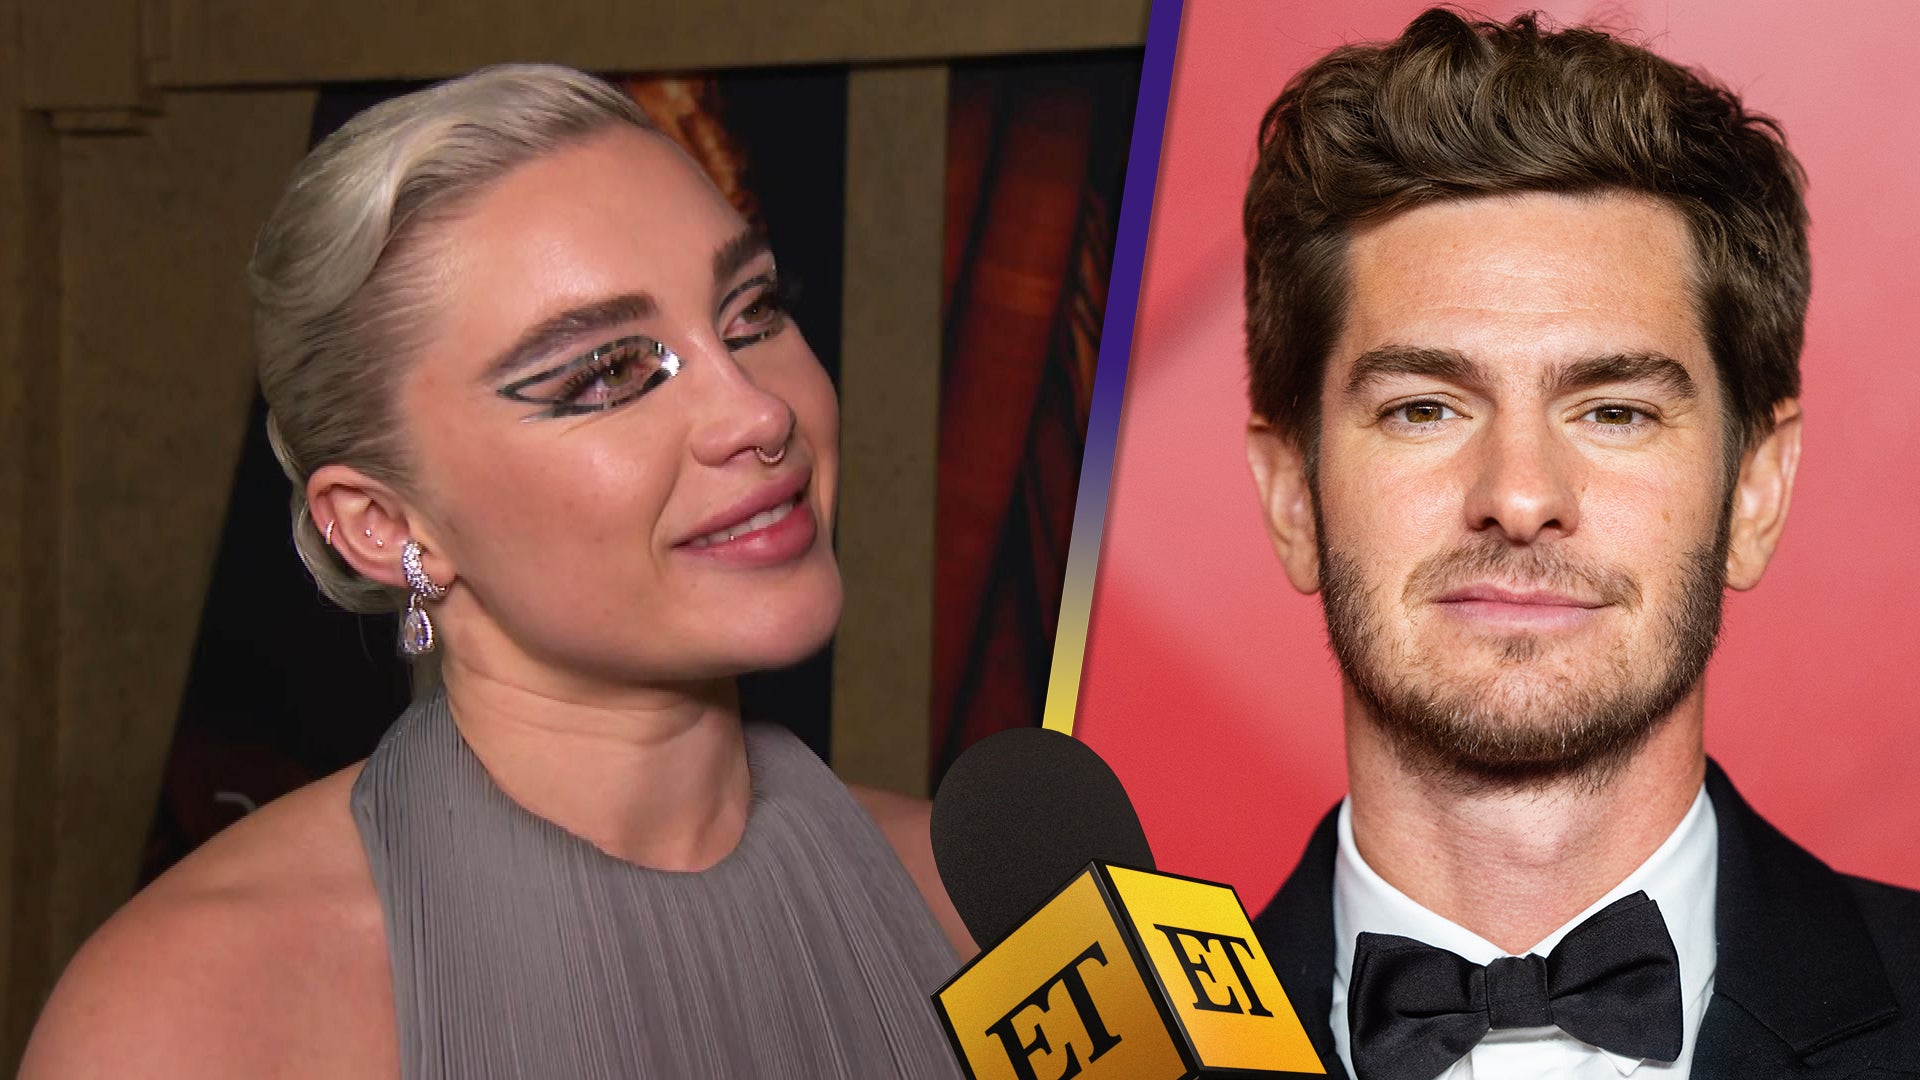 Florence Pugh Gives Update on "We Live in Time" While Praising Andrew Garfield